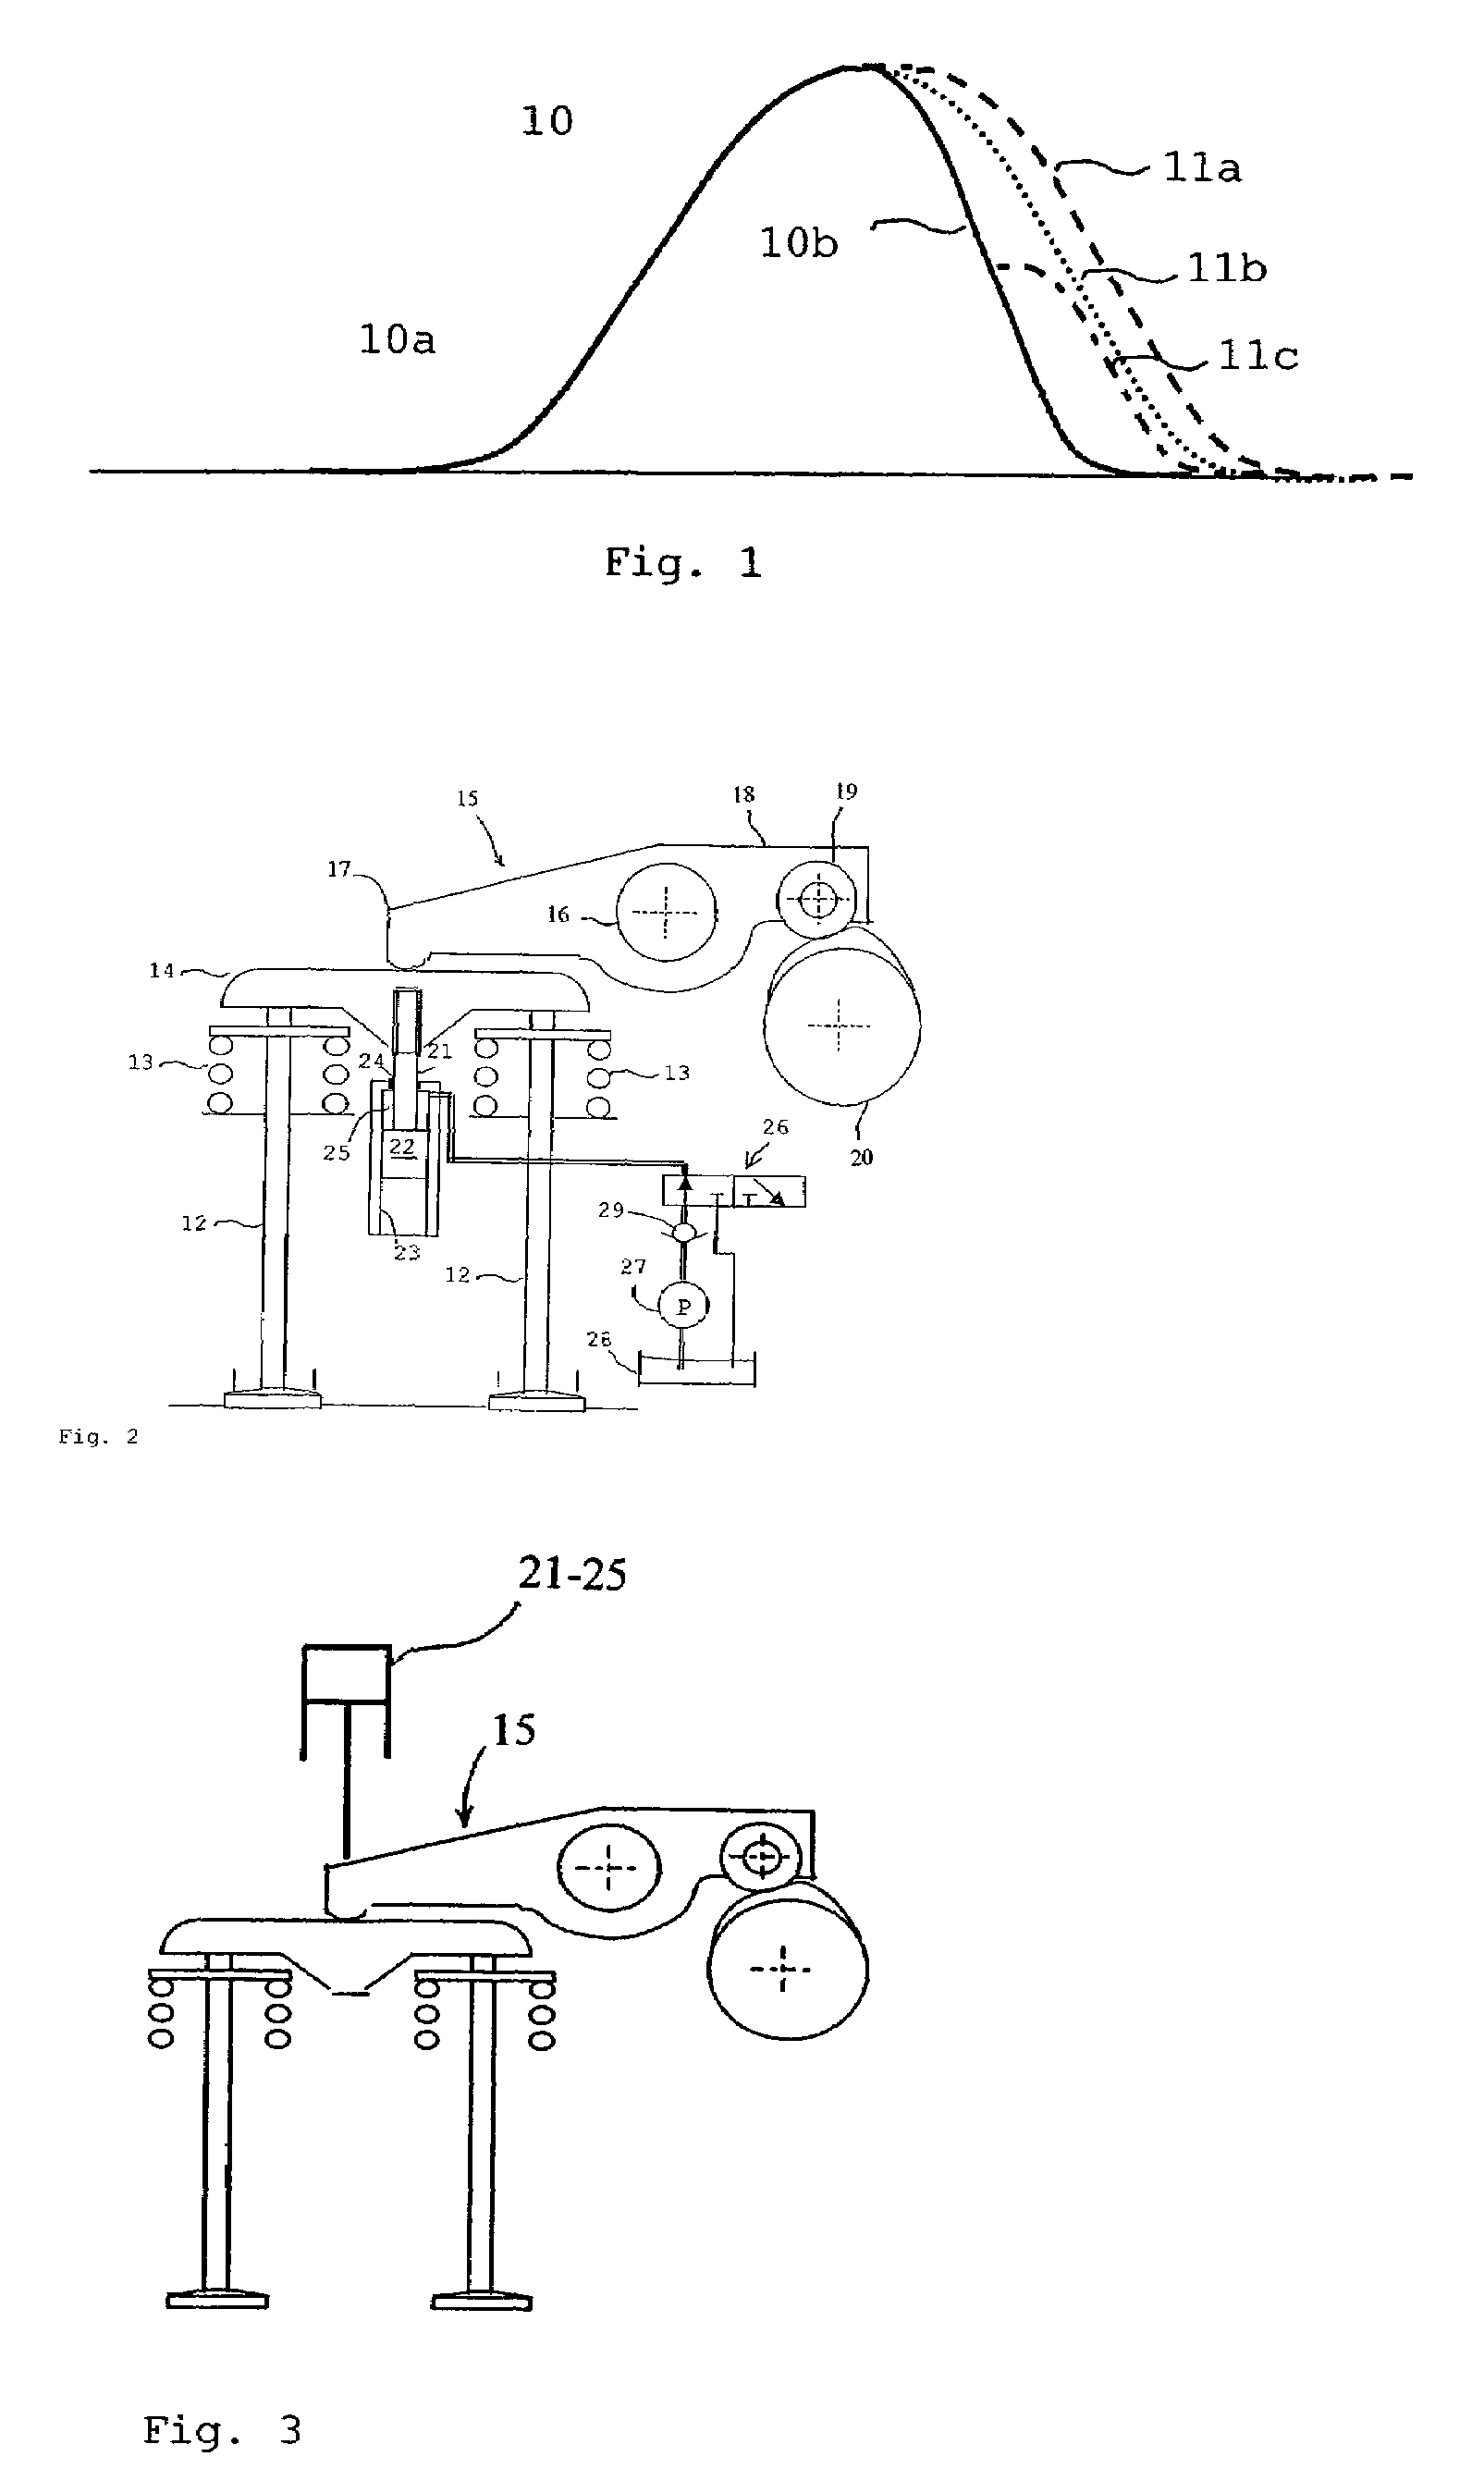 Apparatus for an internal combustion engine